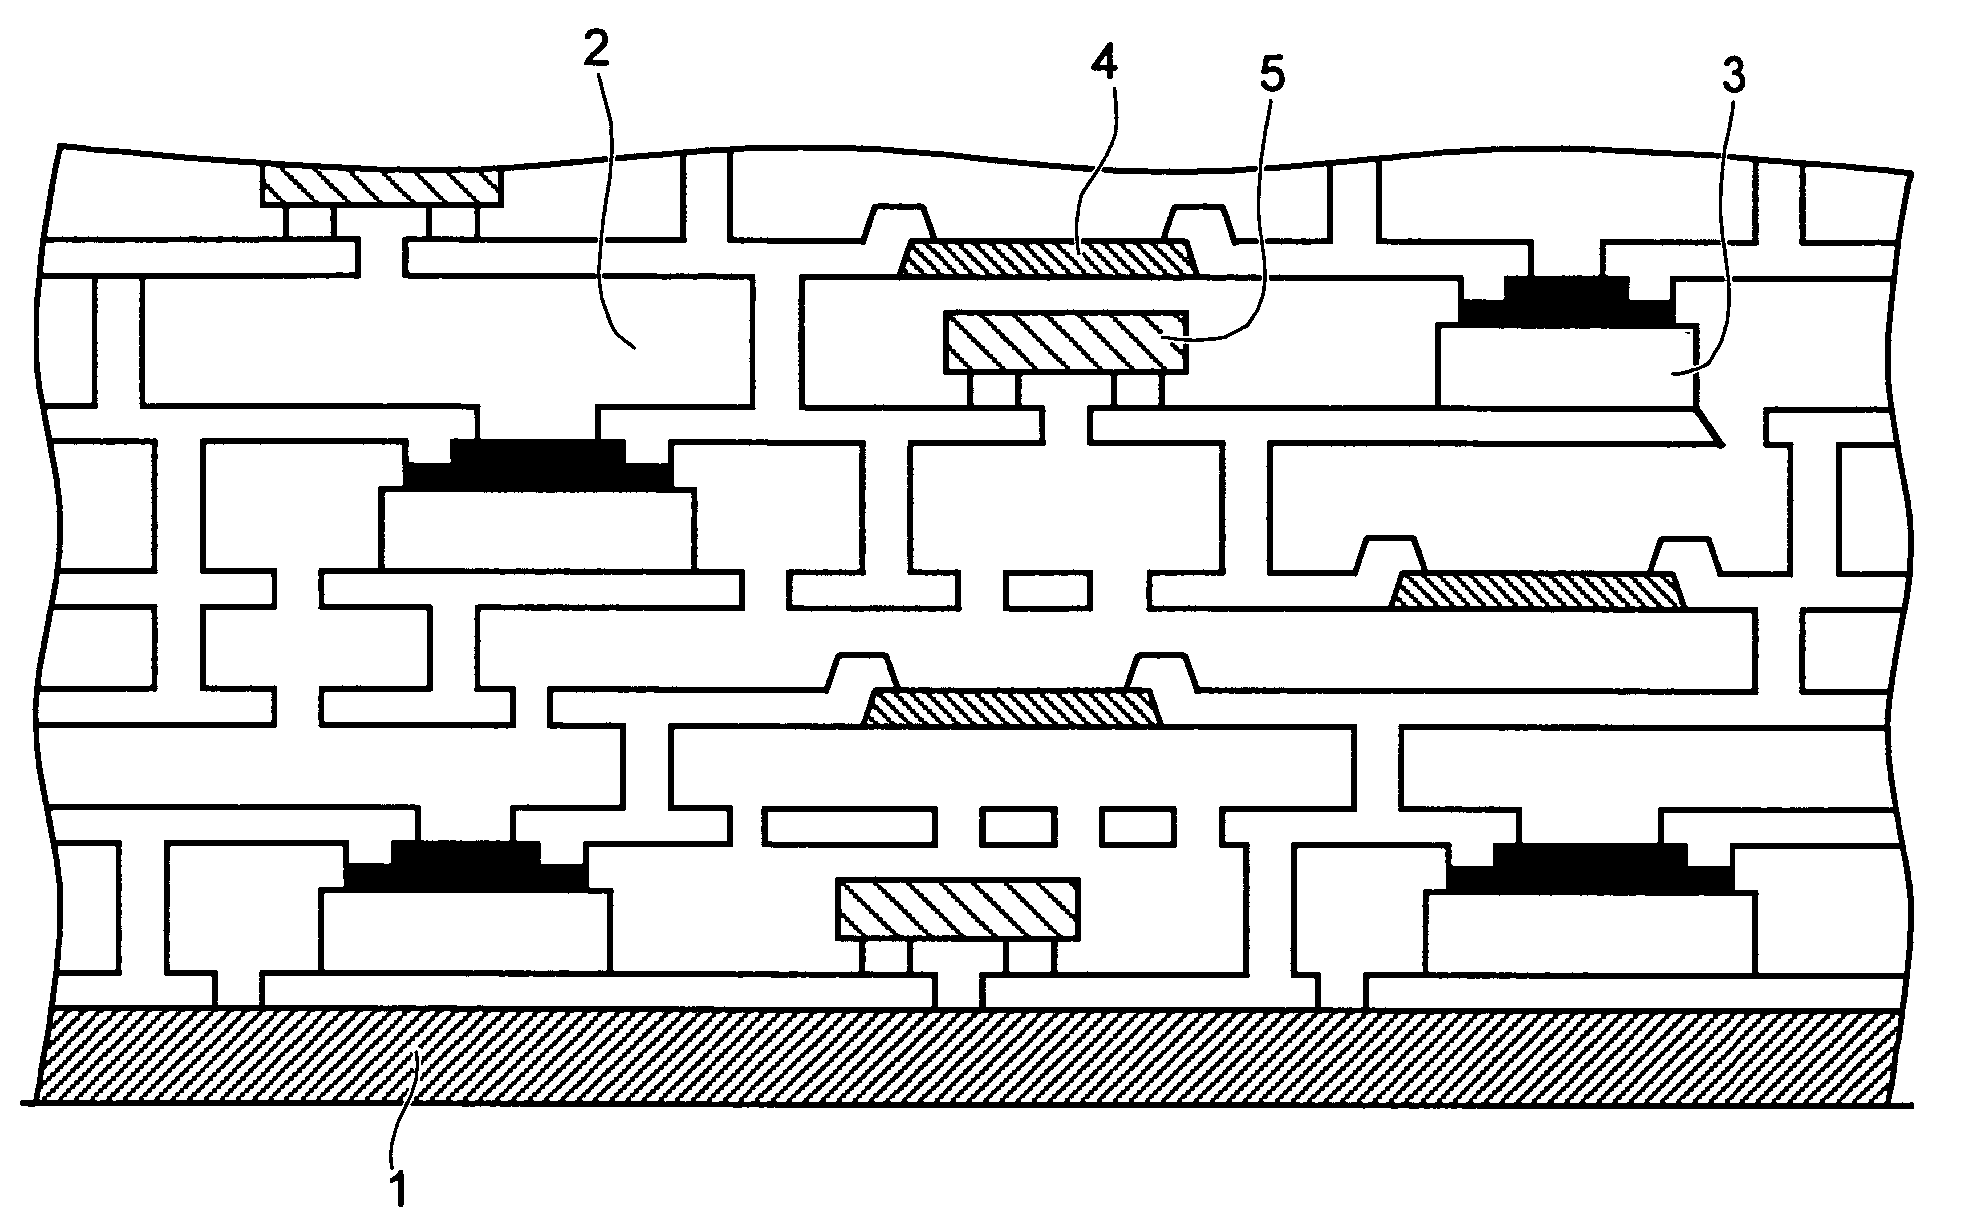 Thin film capacitor, high-density packaging substrate incorporating thin film capacitor, and method for manufacturing thin-film capacitor